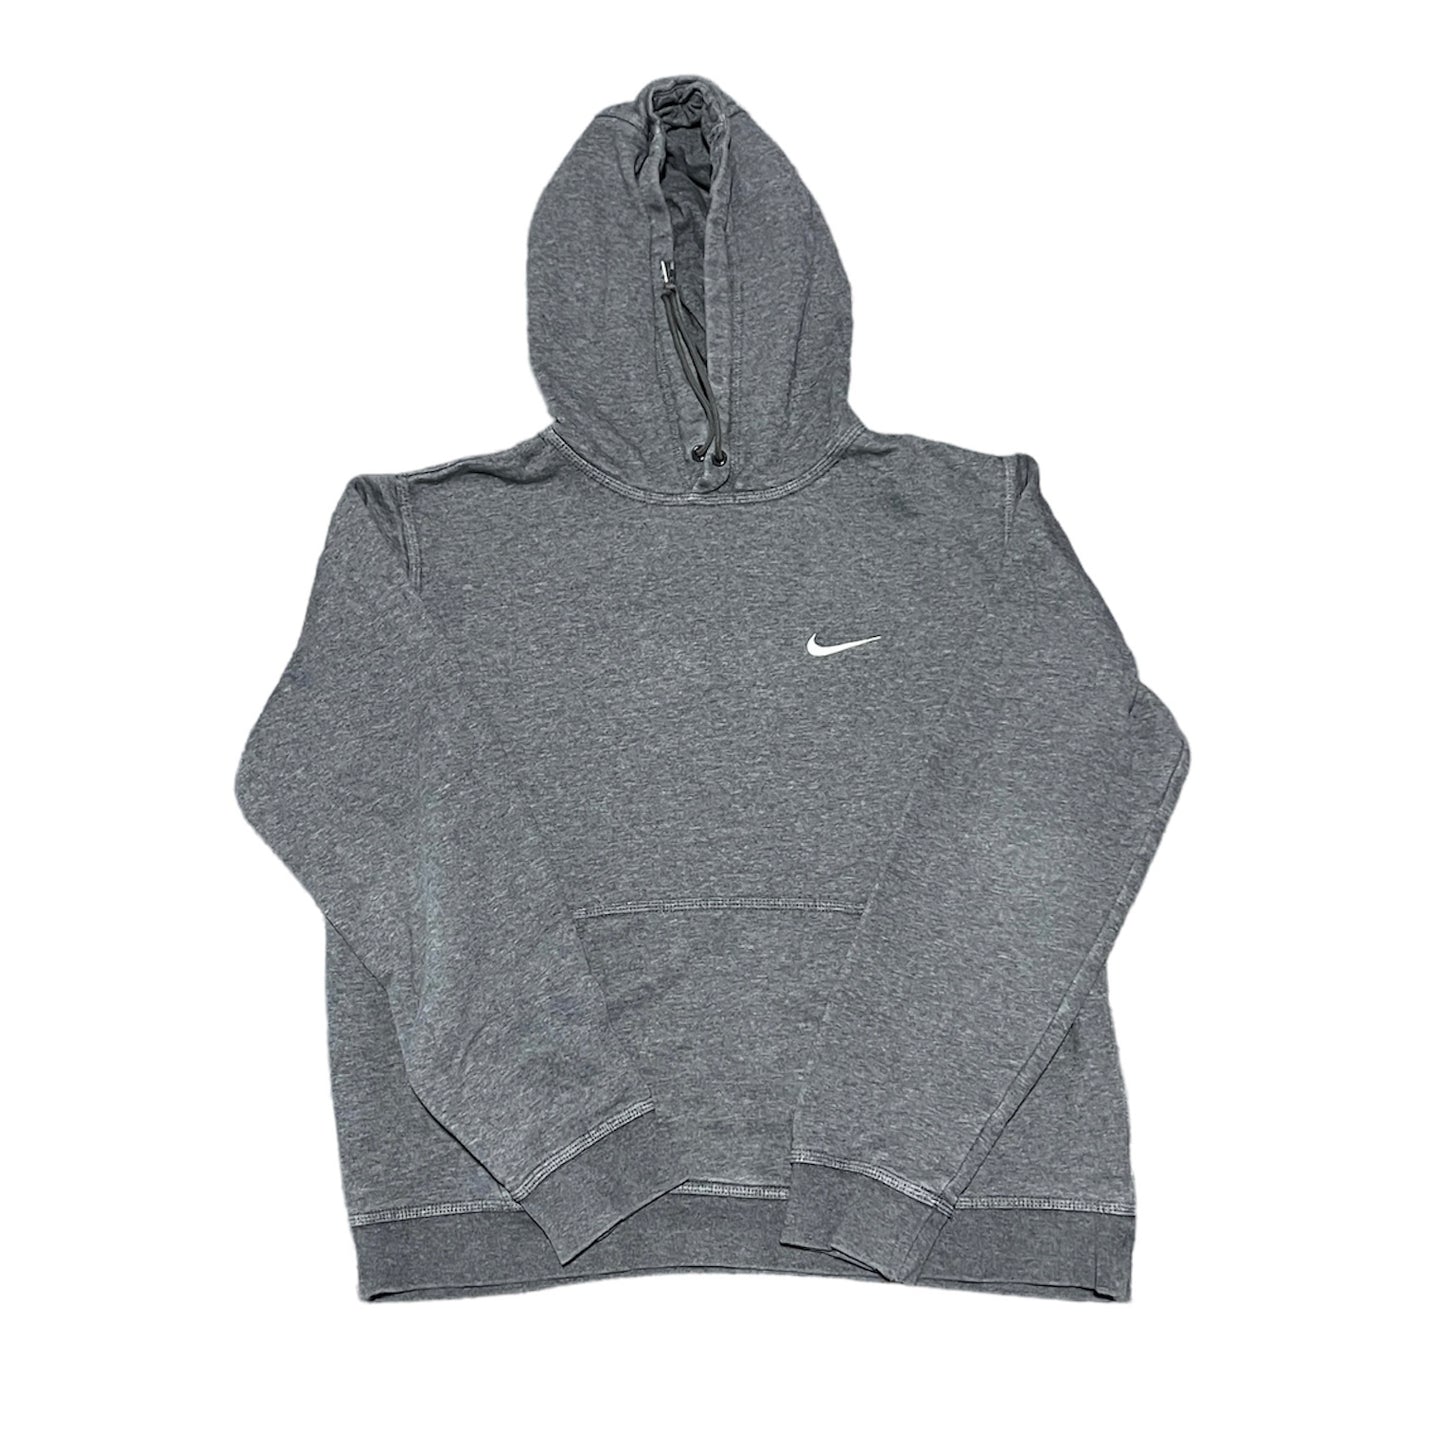 Nike Youth Hoodie Size Large